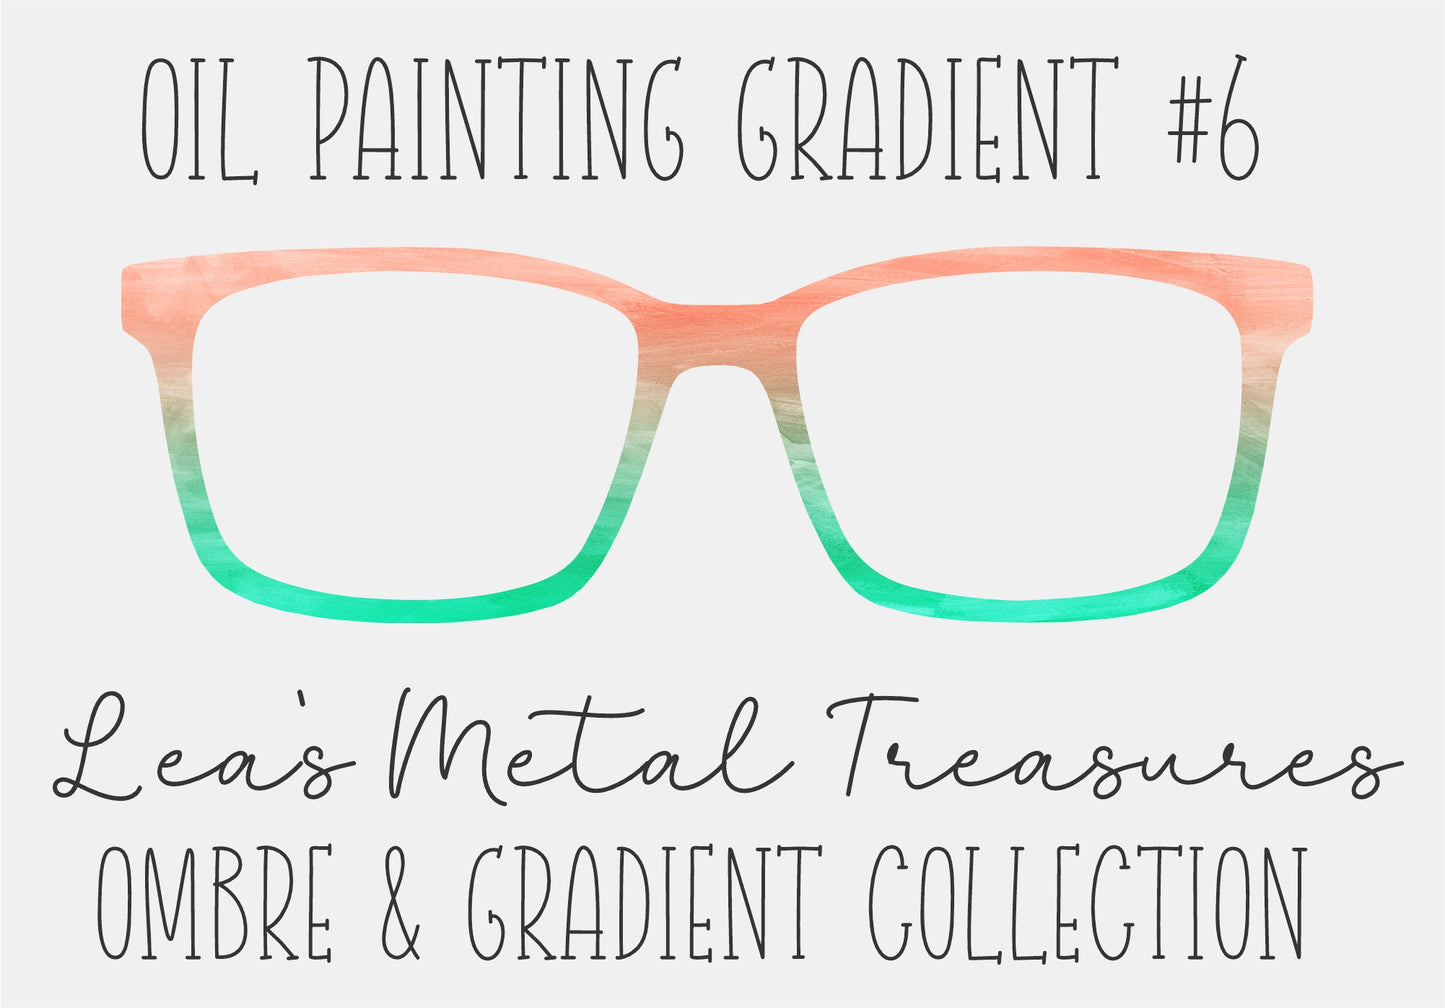 OIL PAINTING GRADIENT 6 Eyewear Frame Toppers COMES WITH MAGNETS